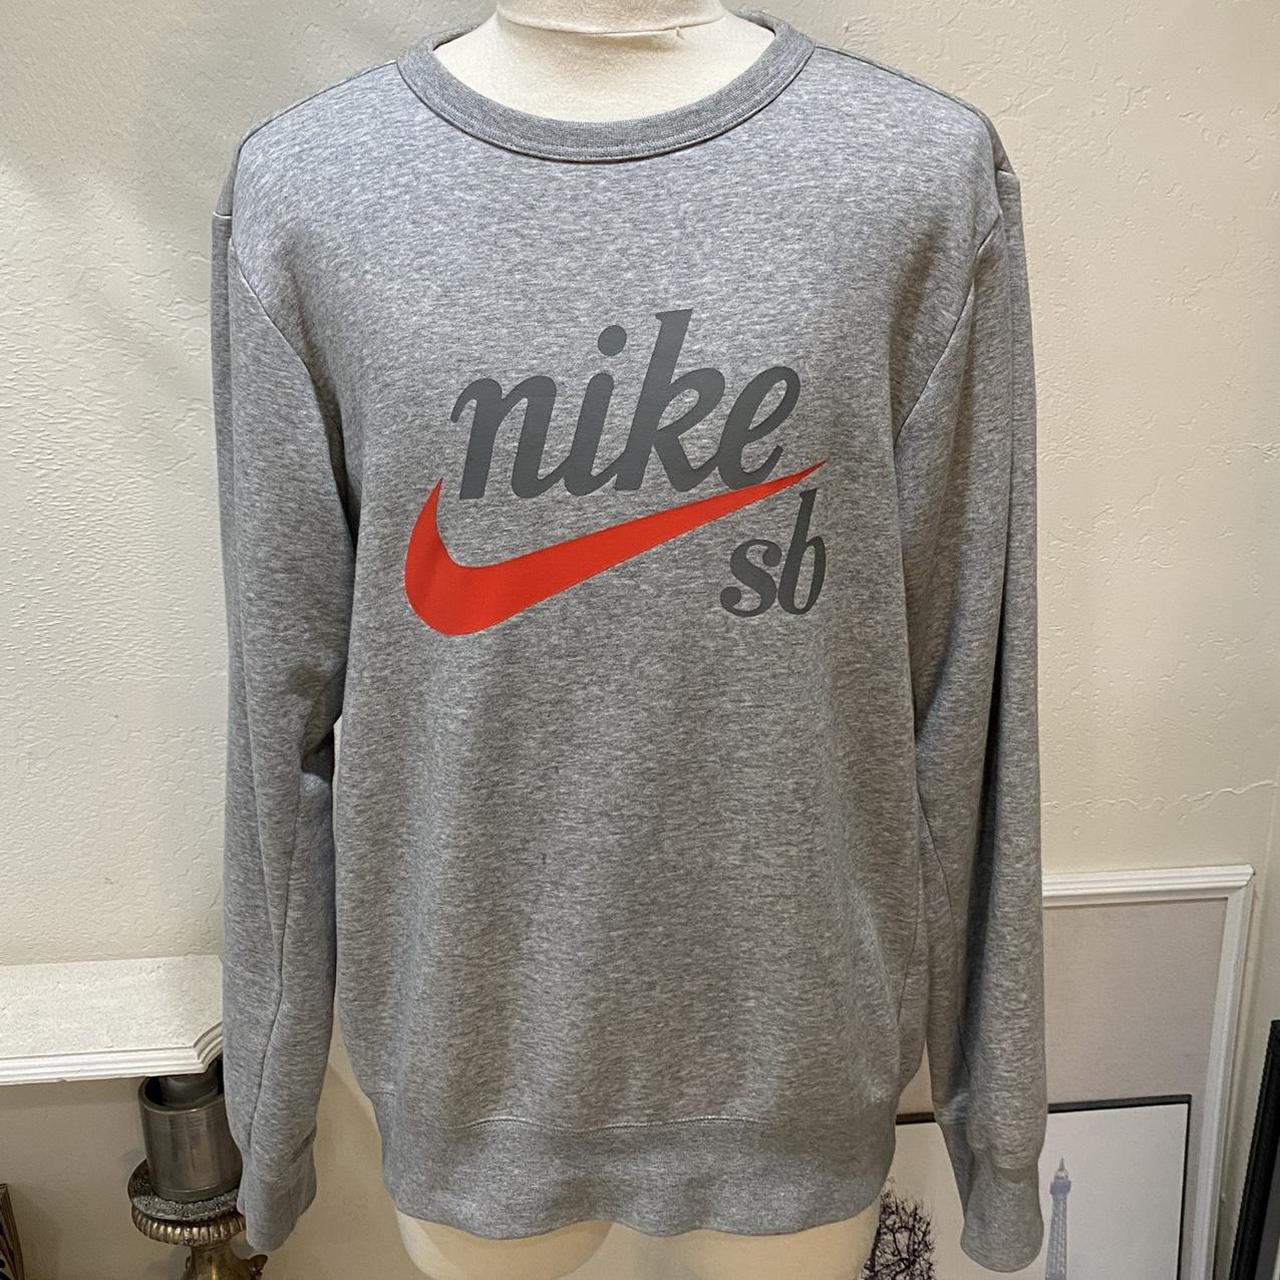 Nike SB Sweater dope colorway / great condition /... - Depop